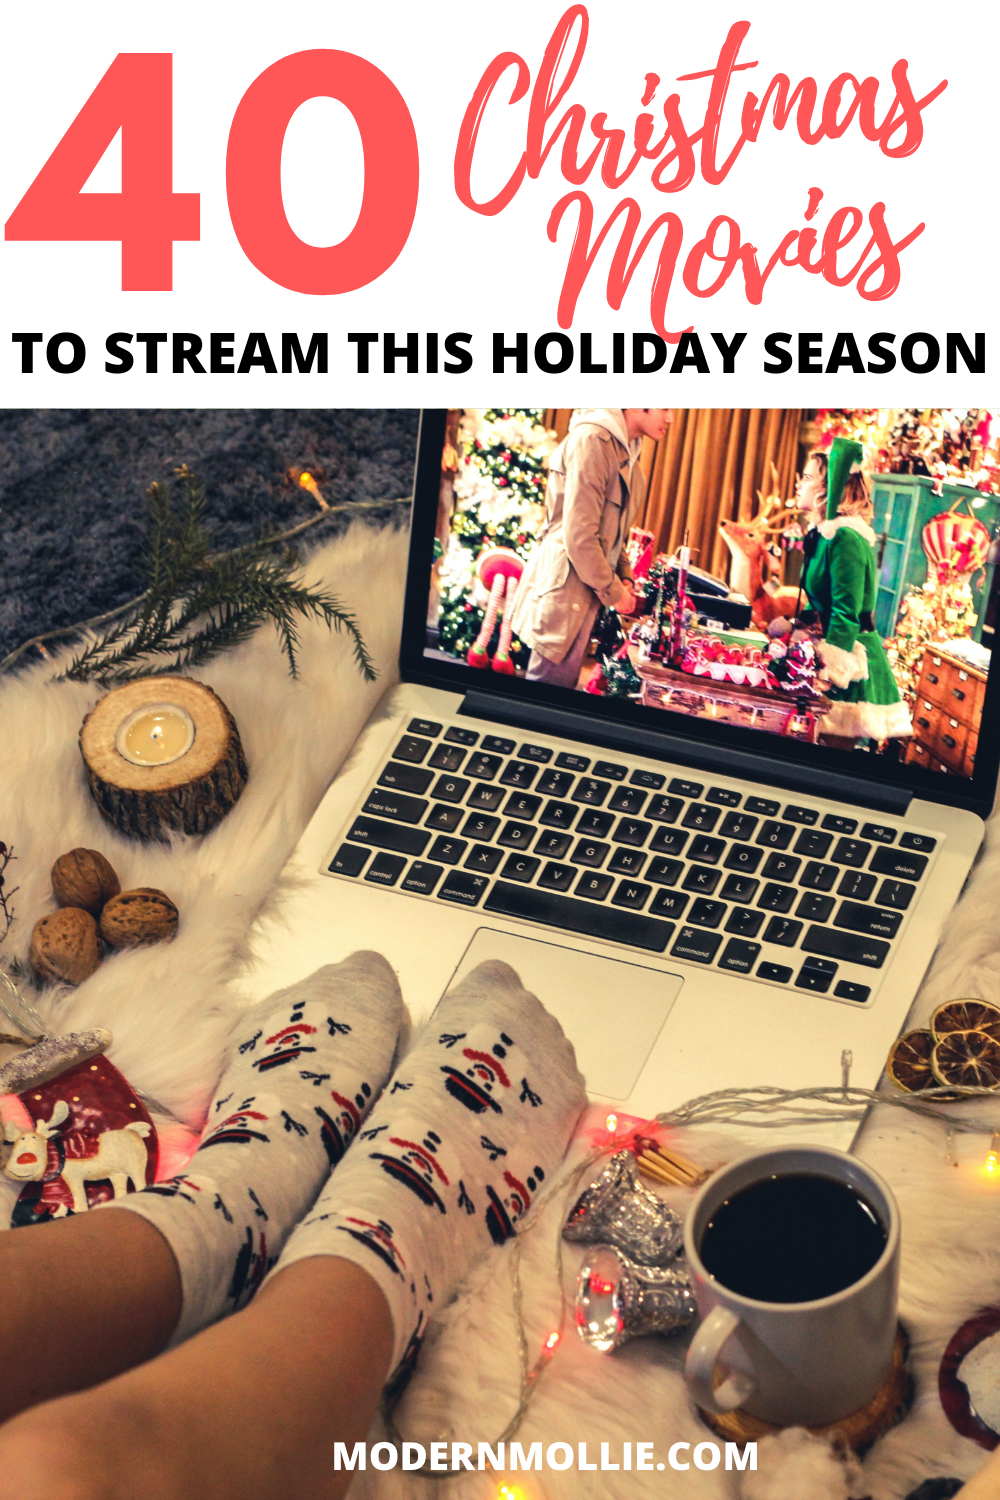 Ultimate Christmas Movie Streaming Guide